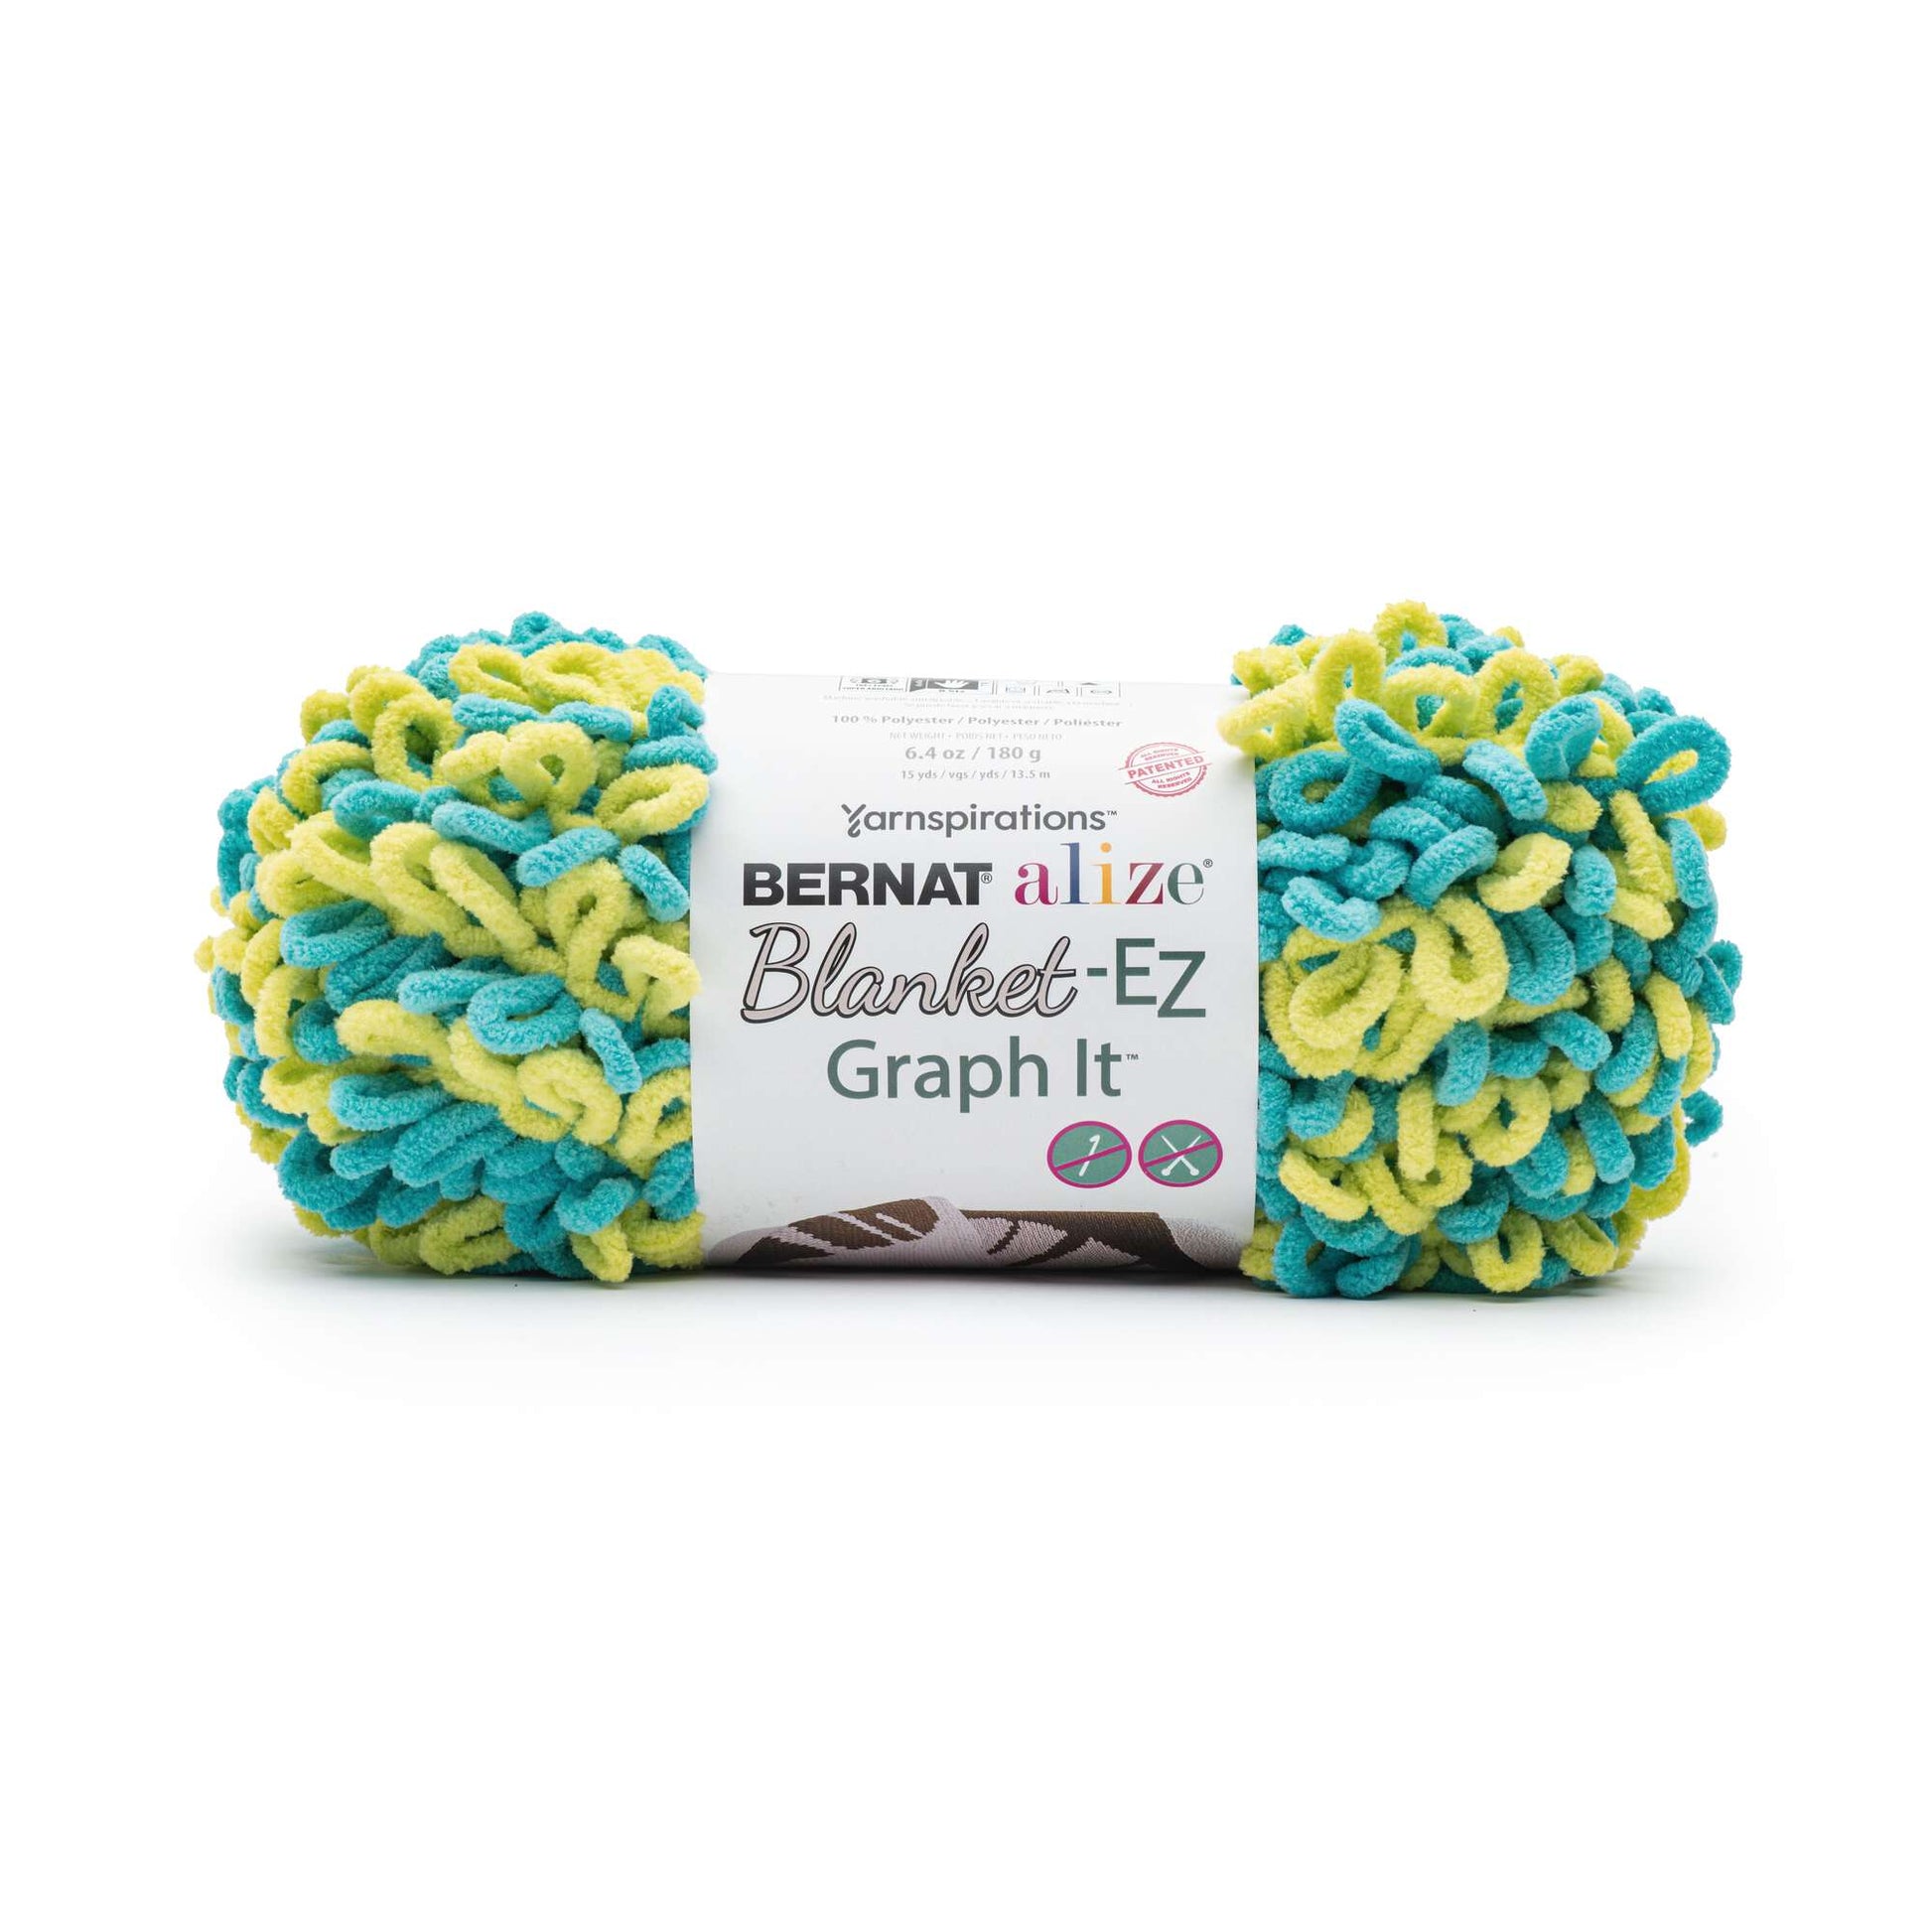 Sage Eternal Bliss Yarn by Yarn Bee - Thick, Soft Chunky Polyester Yarn for  Knitting, Crocheting Blankets, Afghans, Hats & More